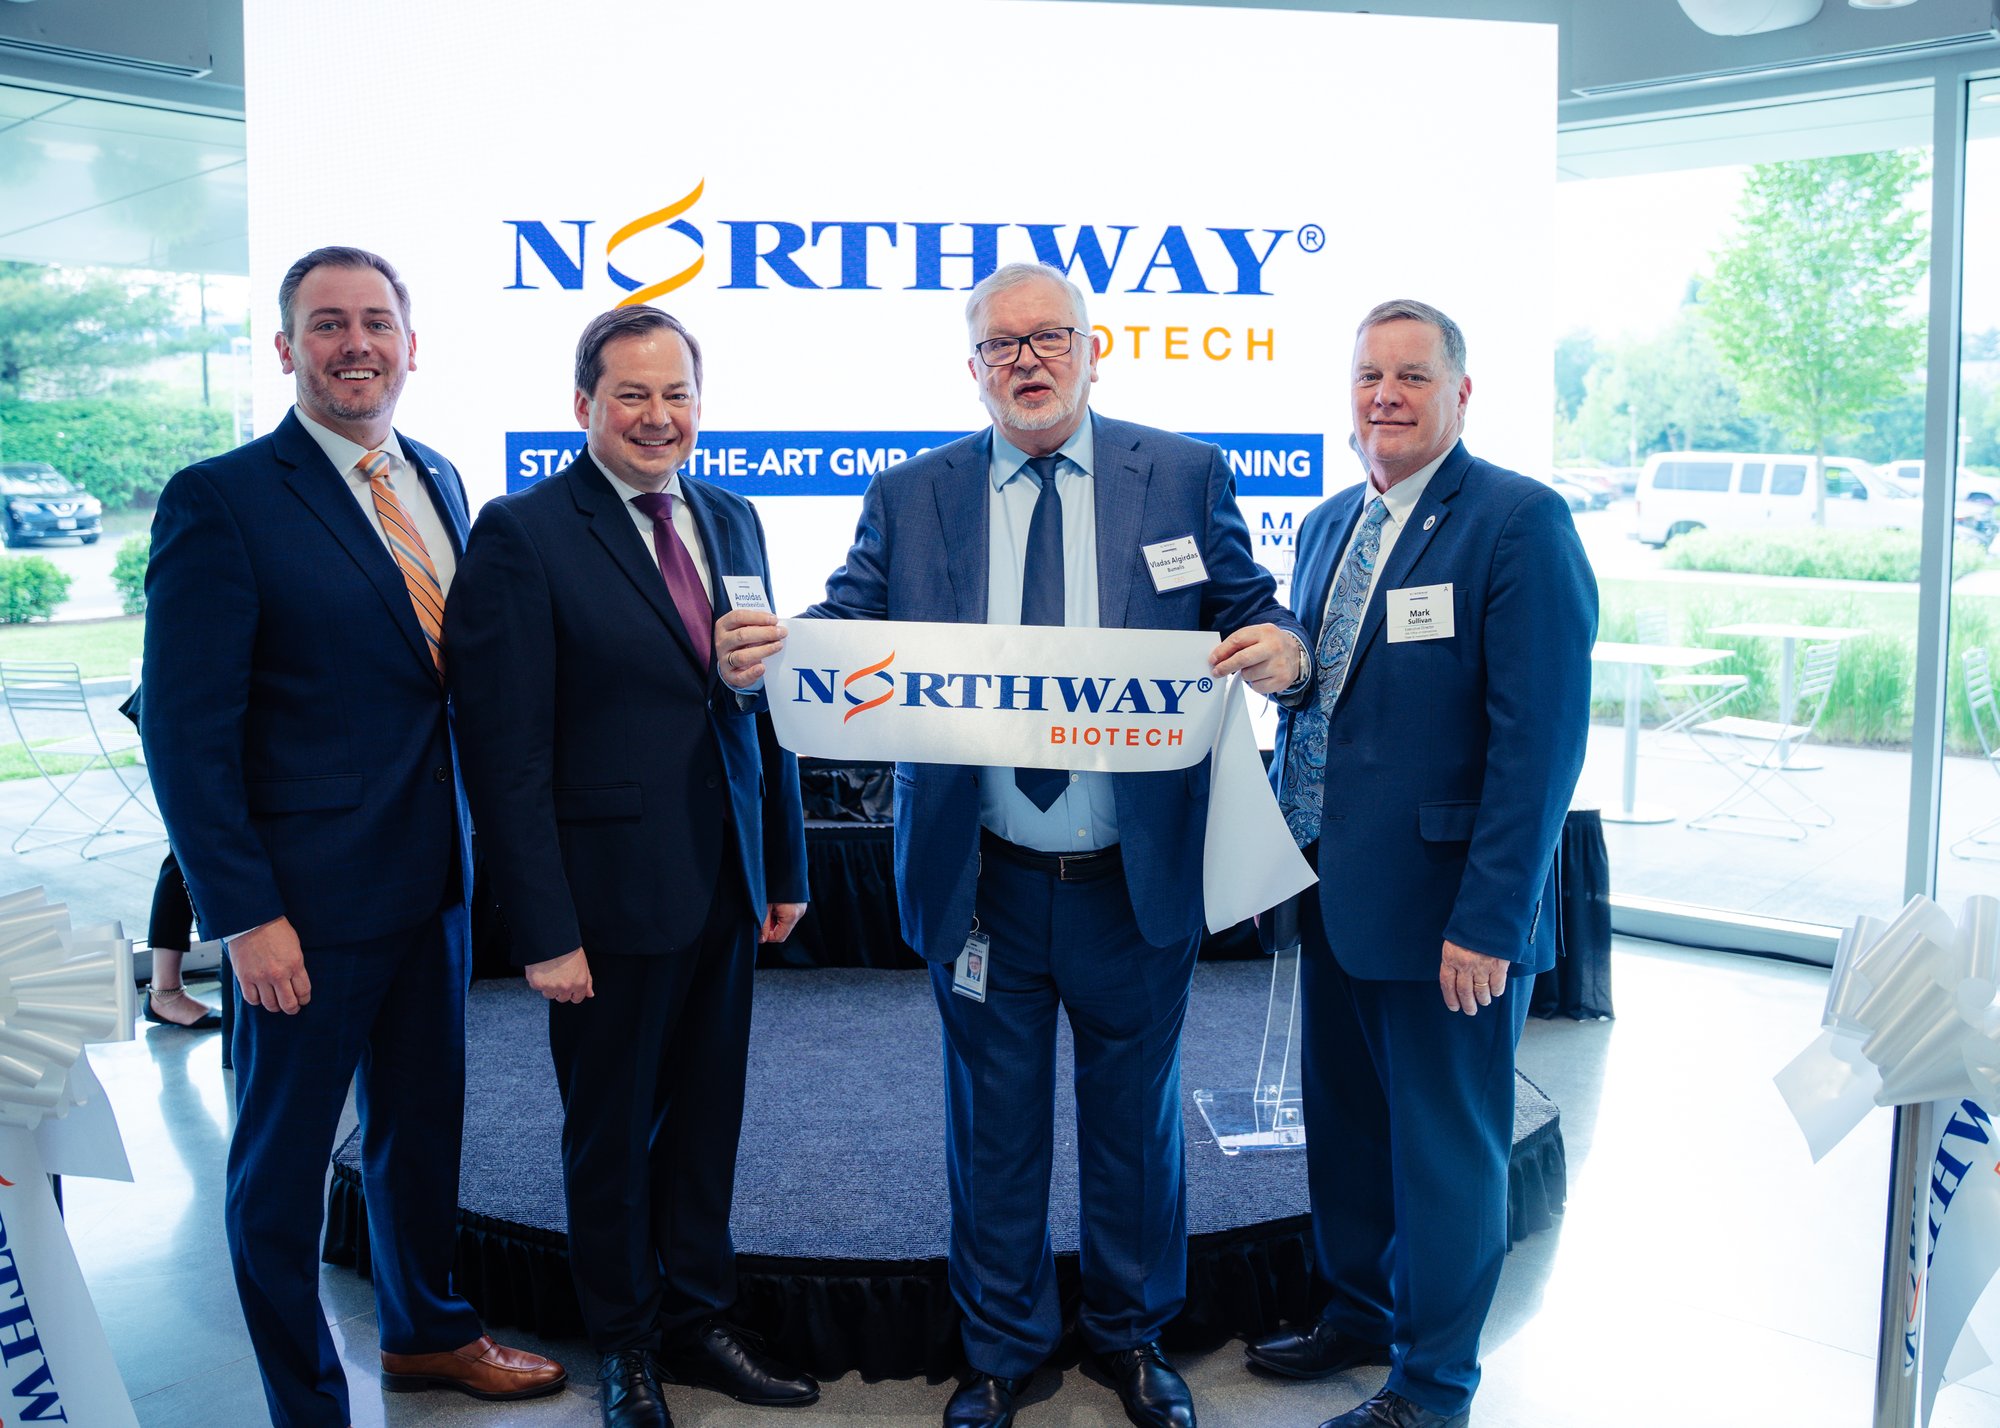 Northway Biotech Celebrates Successful Completion of Expanded Microbial and Mammalian GMP Facilities in the Greater Boston Area